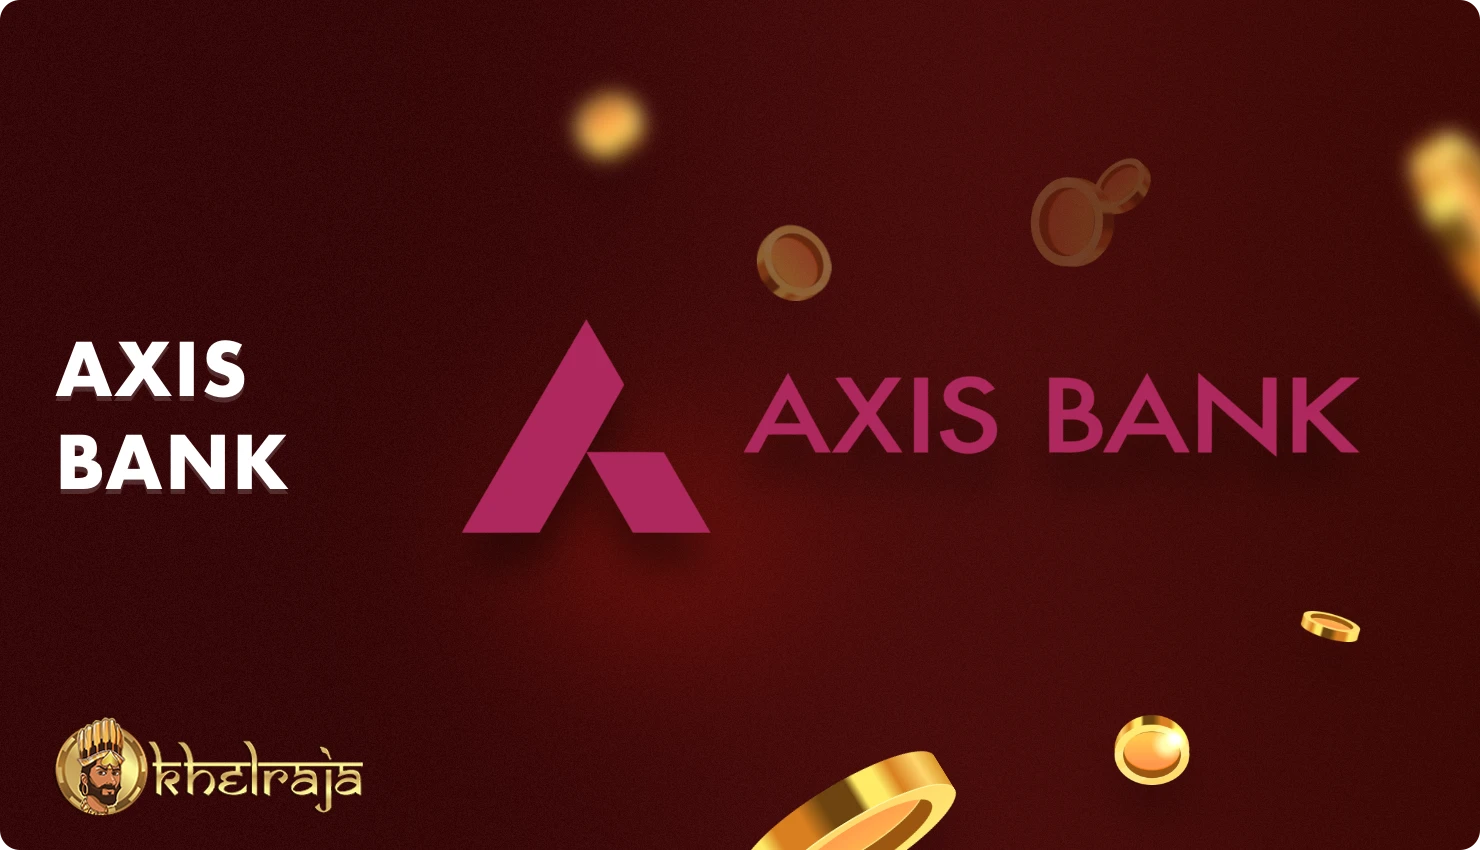 In Khelraja you can make a deposit and withdraw money through Axis Bank